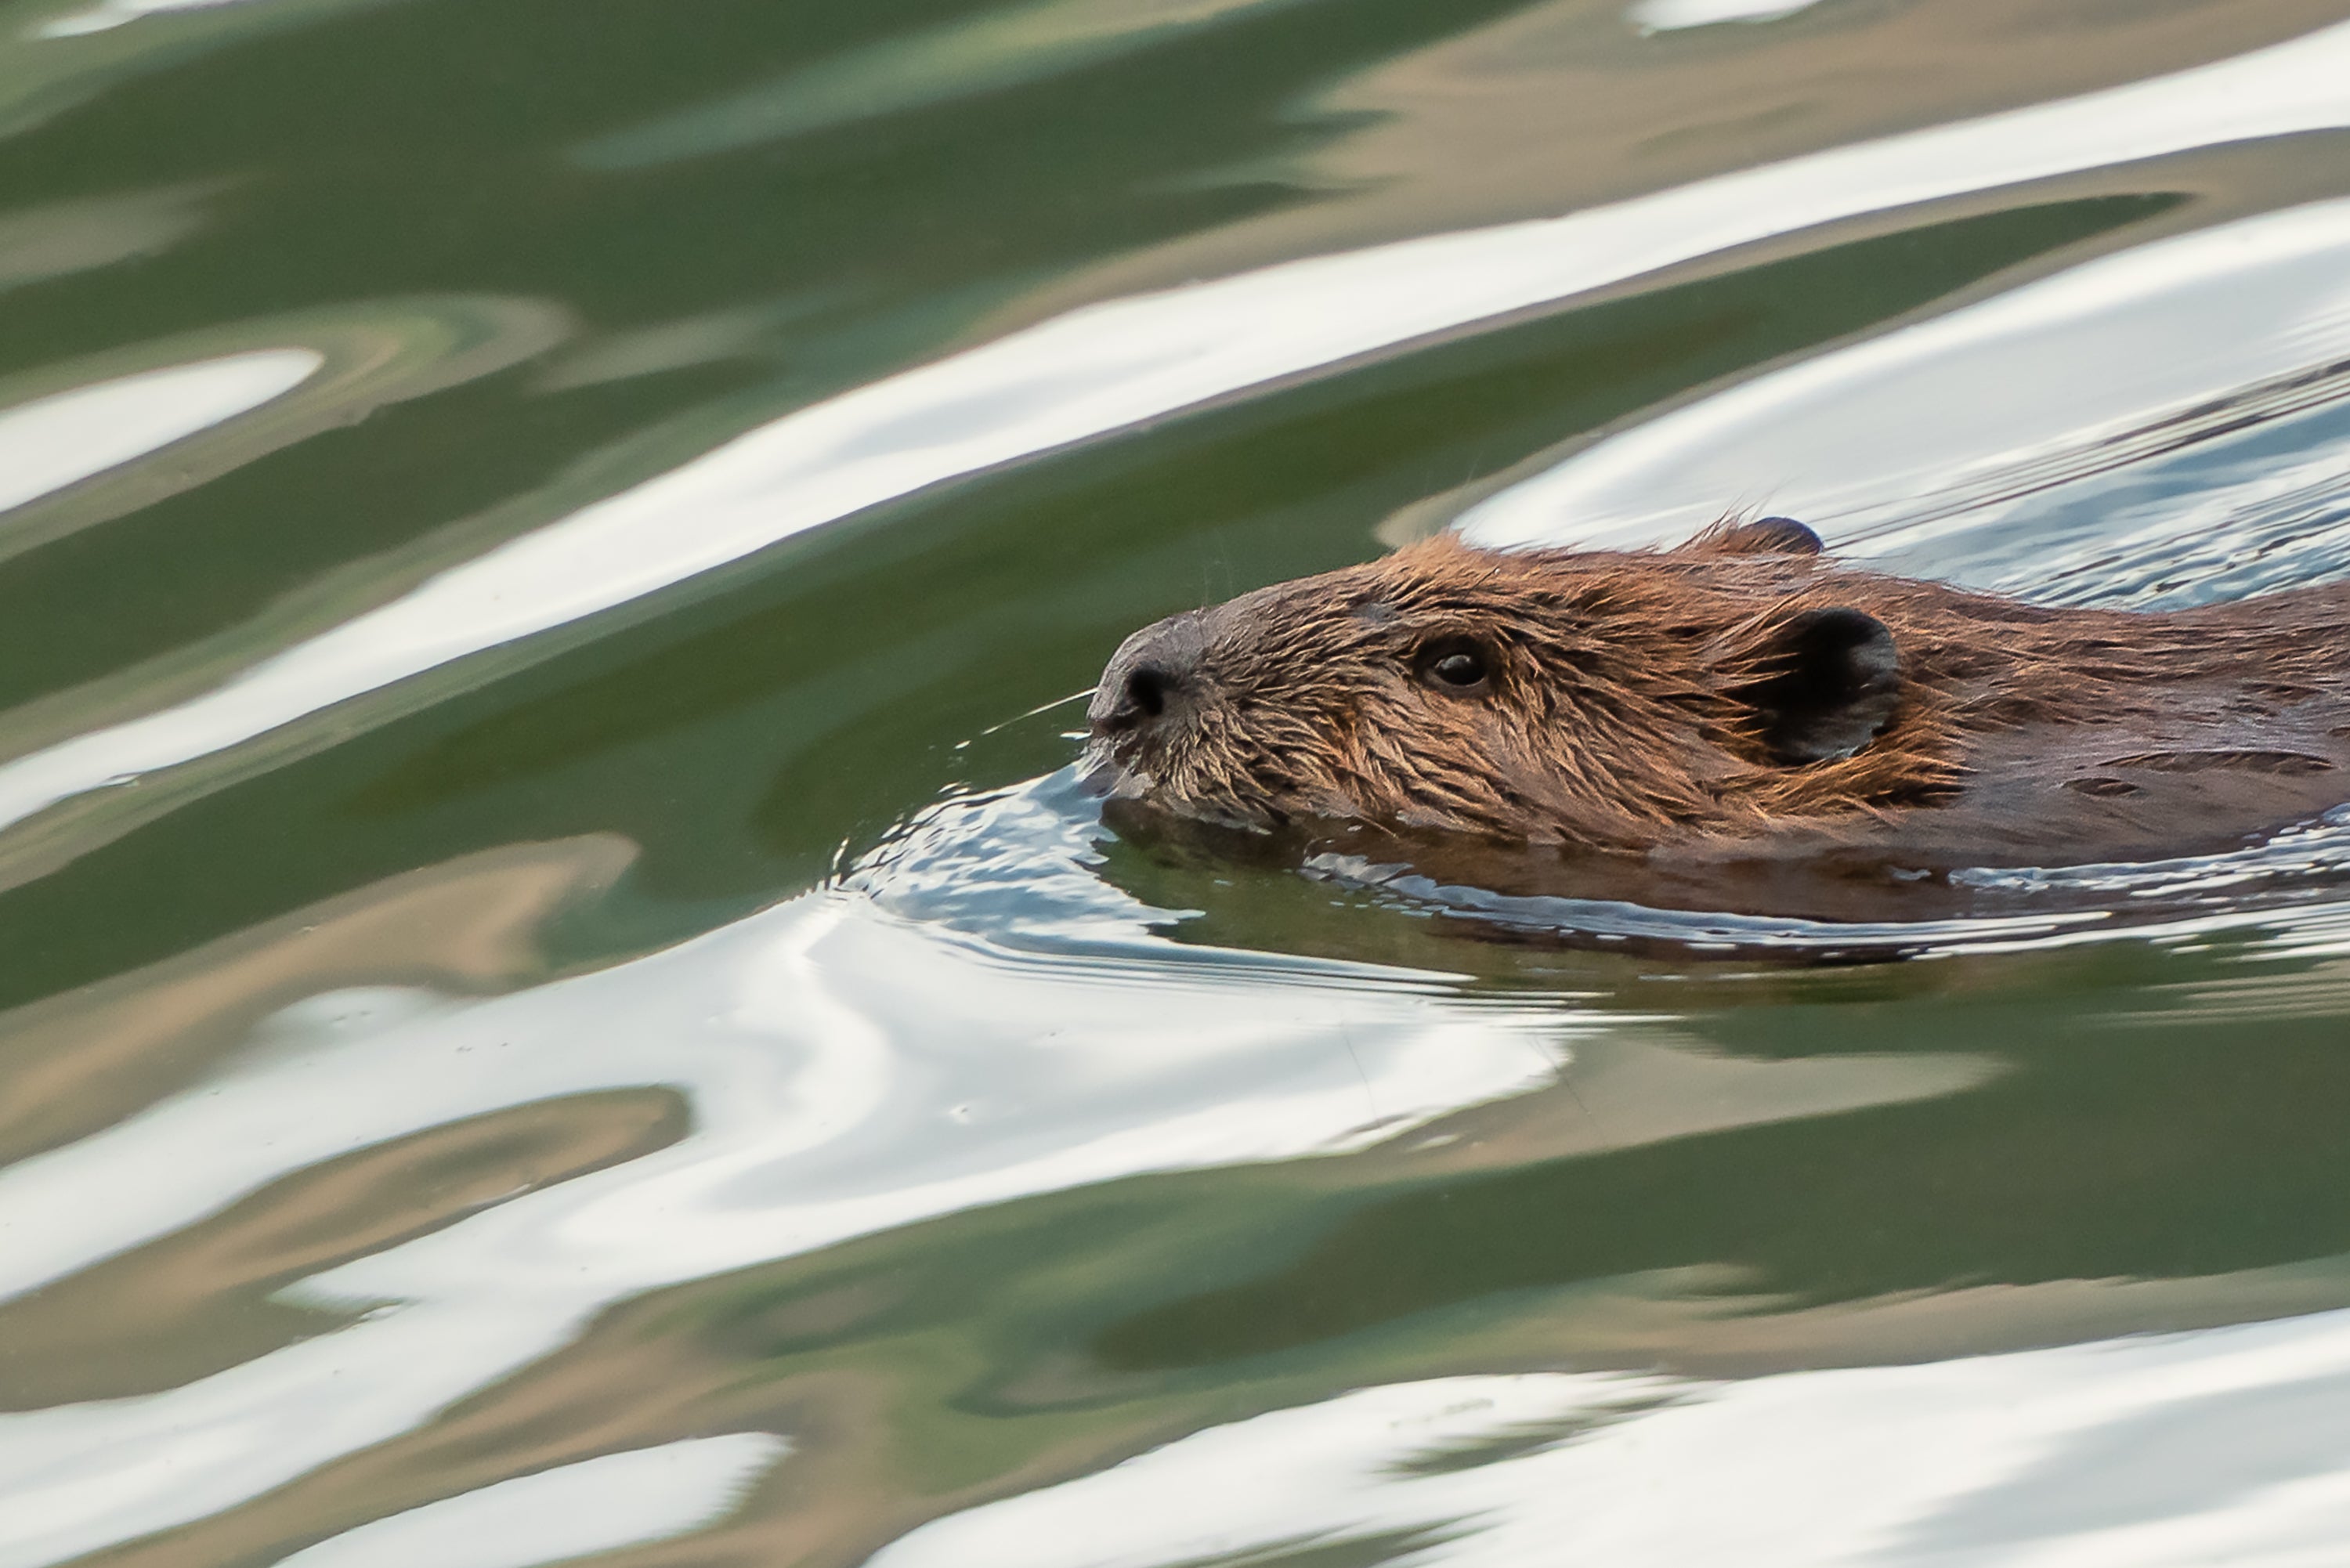 There are pros and cons to weigh up when considering the reintroduction of beavers